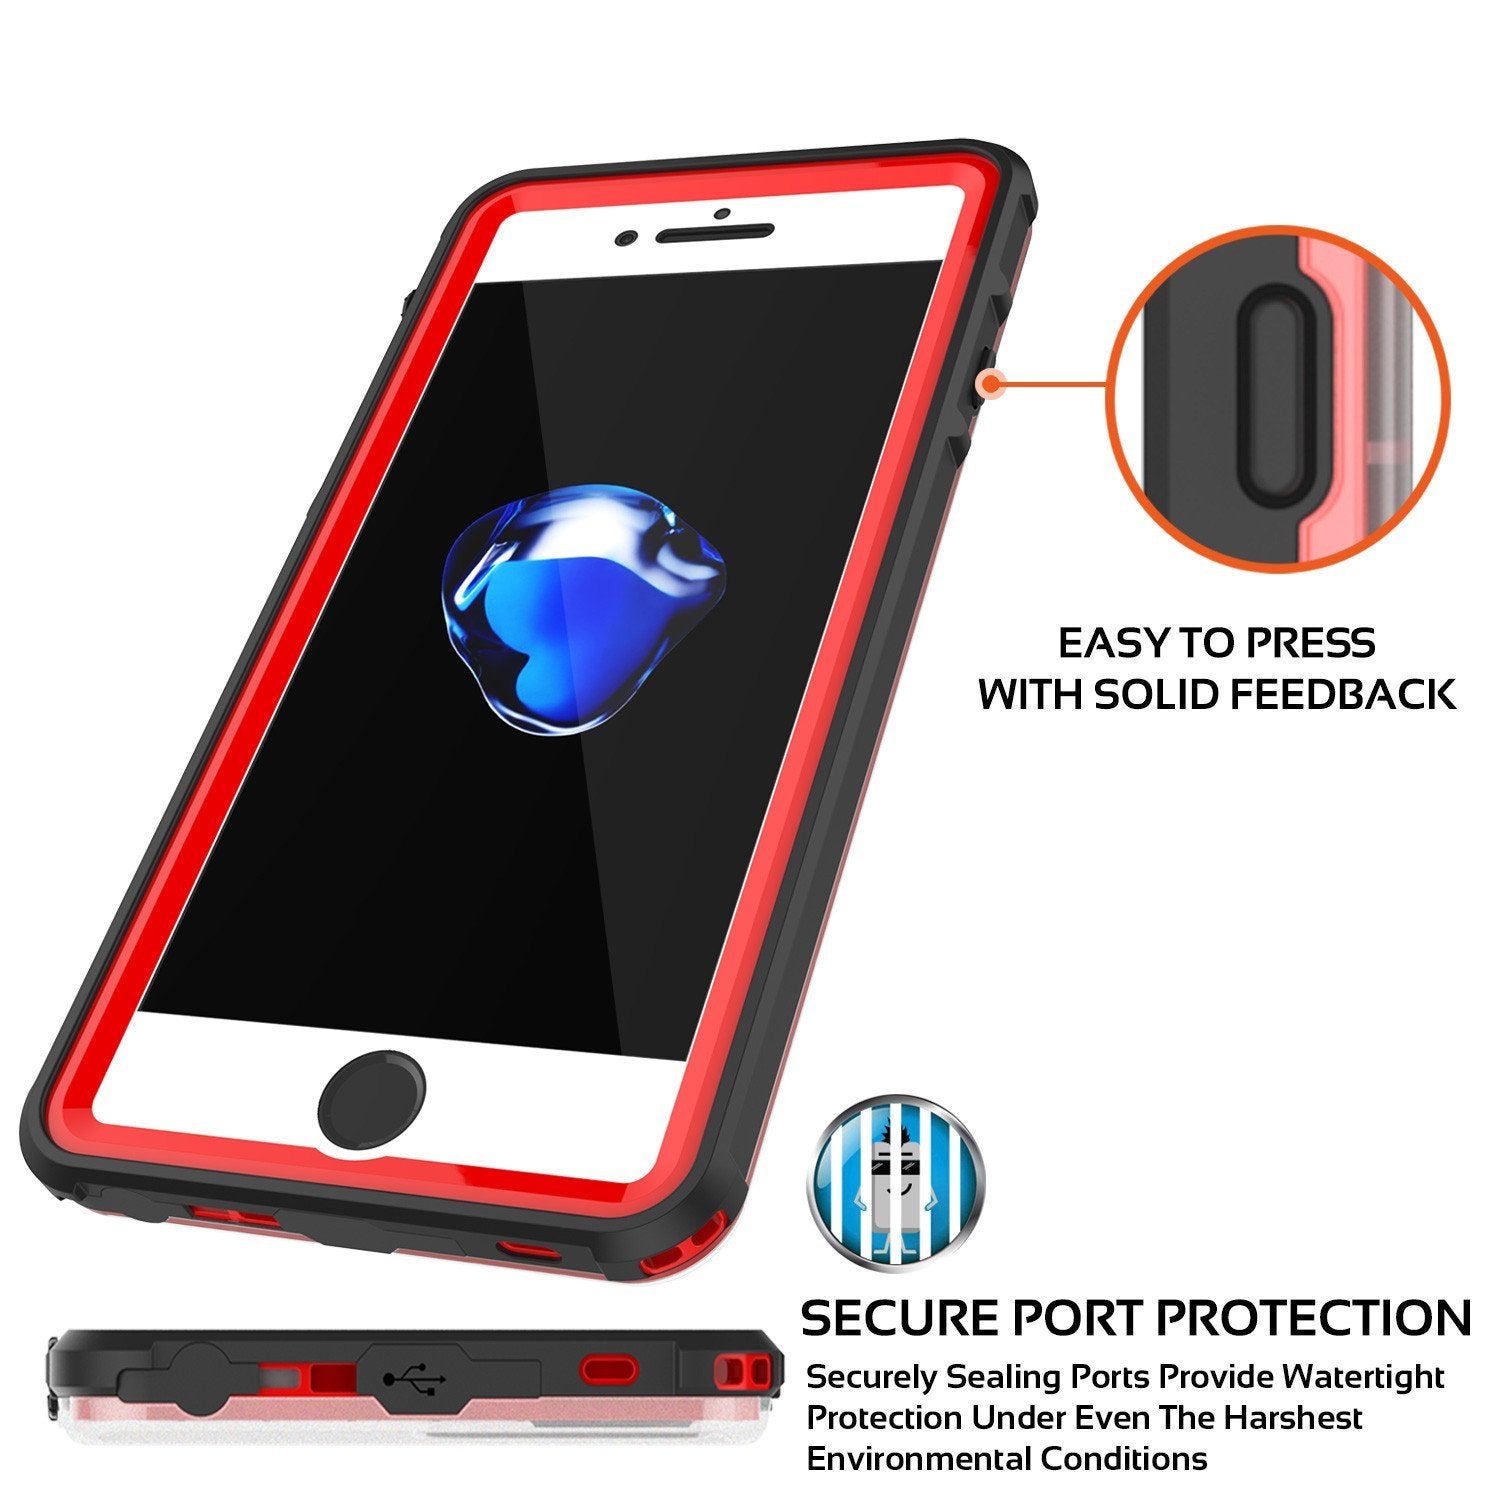 iPhone 8+ Plus Waterproof Case, PUNKcase CRYSTAL Red W/ Attached Screen Protector  | Warranty